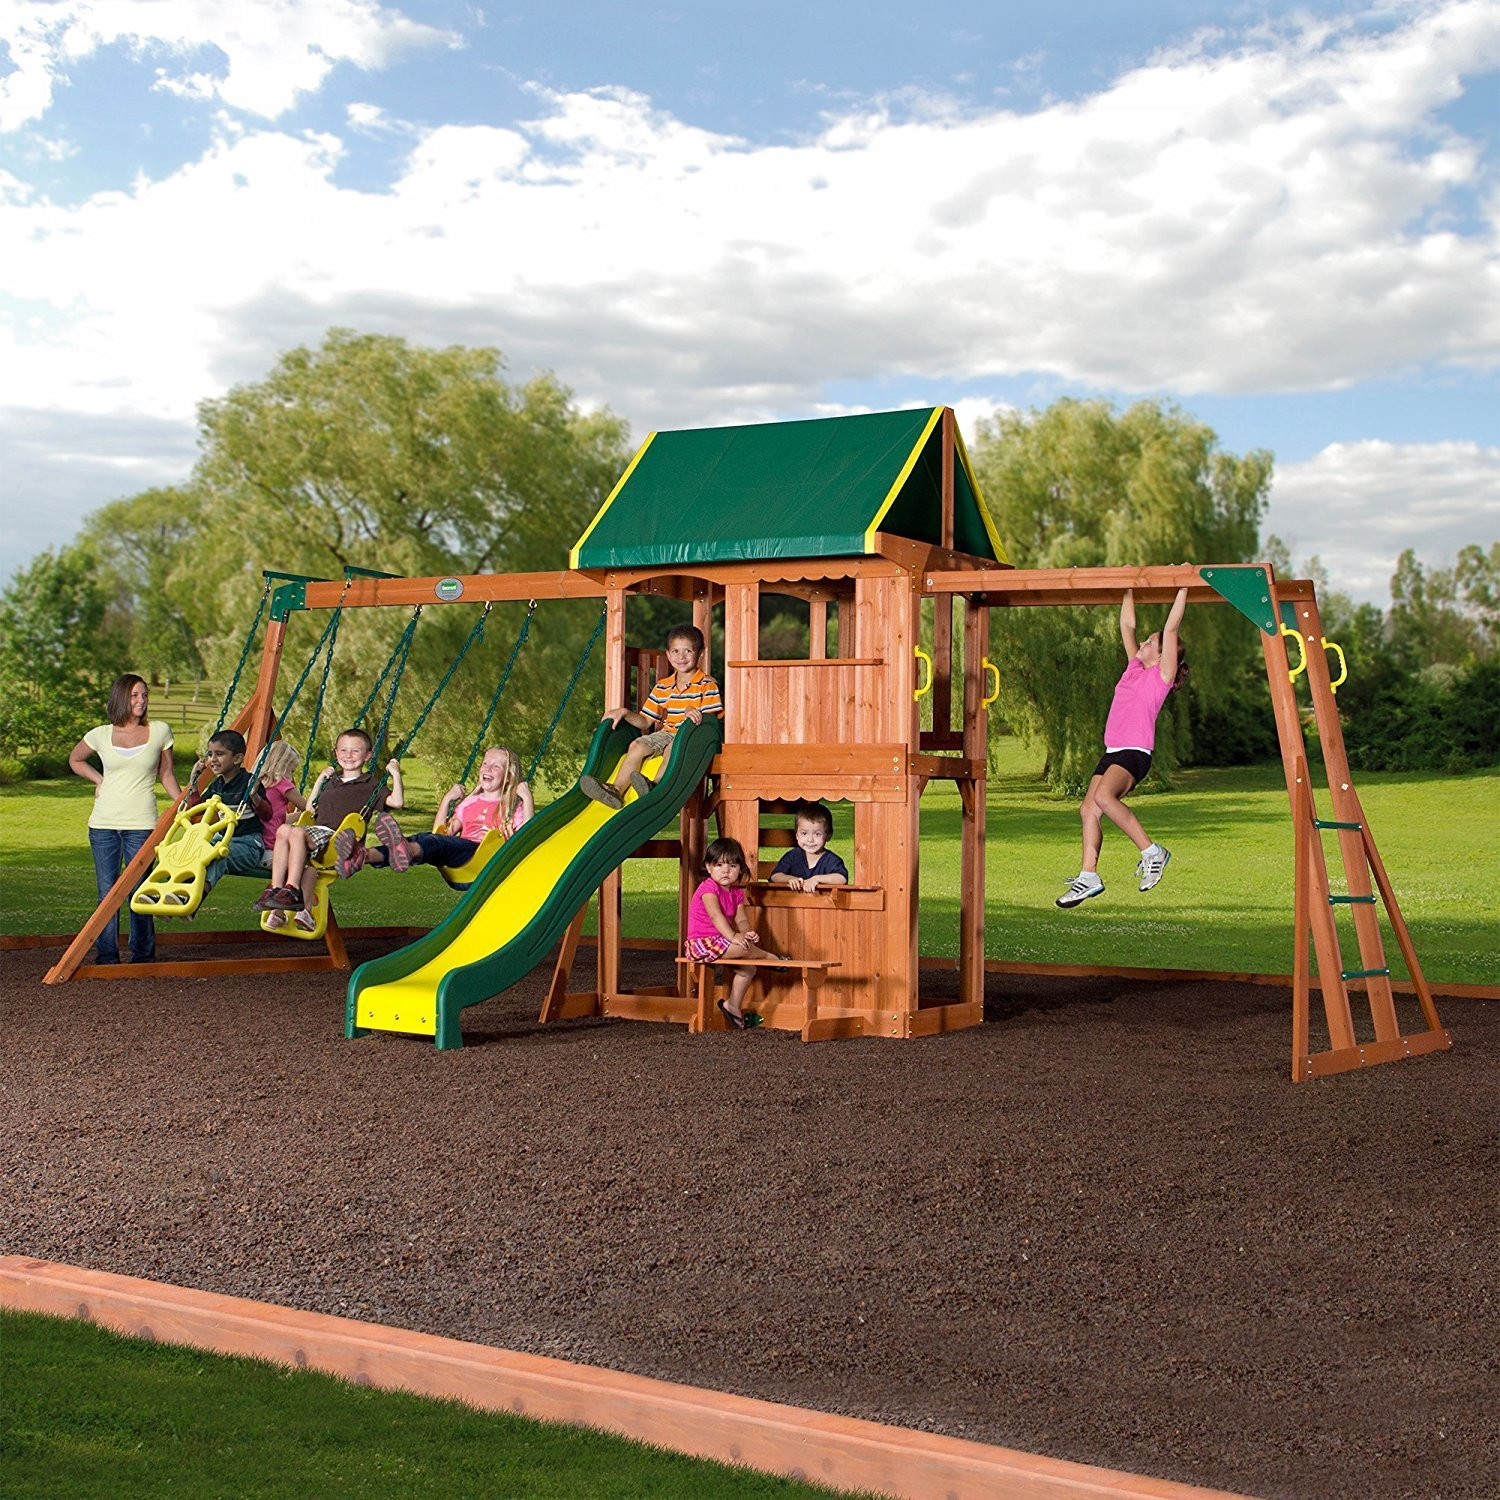 Kids Canopy Swing
 Playground Set For Kids Canopy Outdoor Wood Swing Children